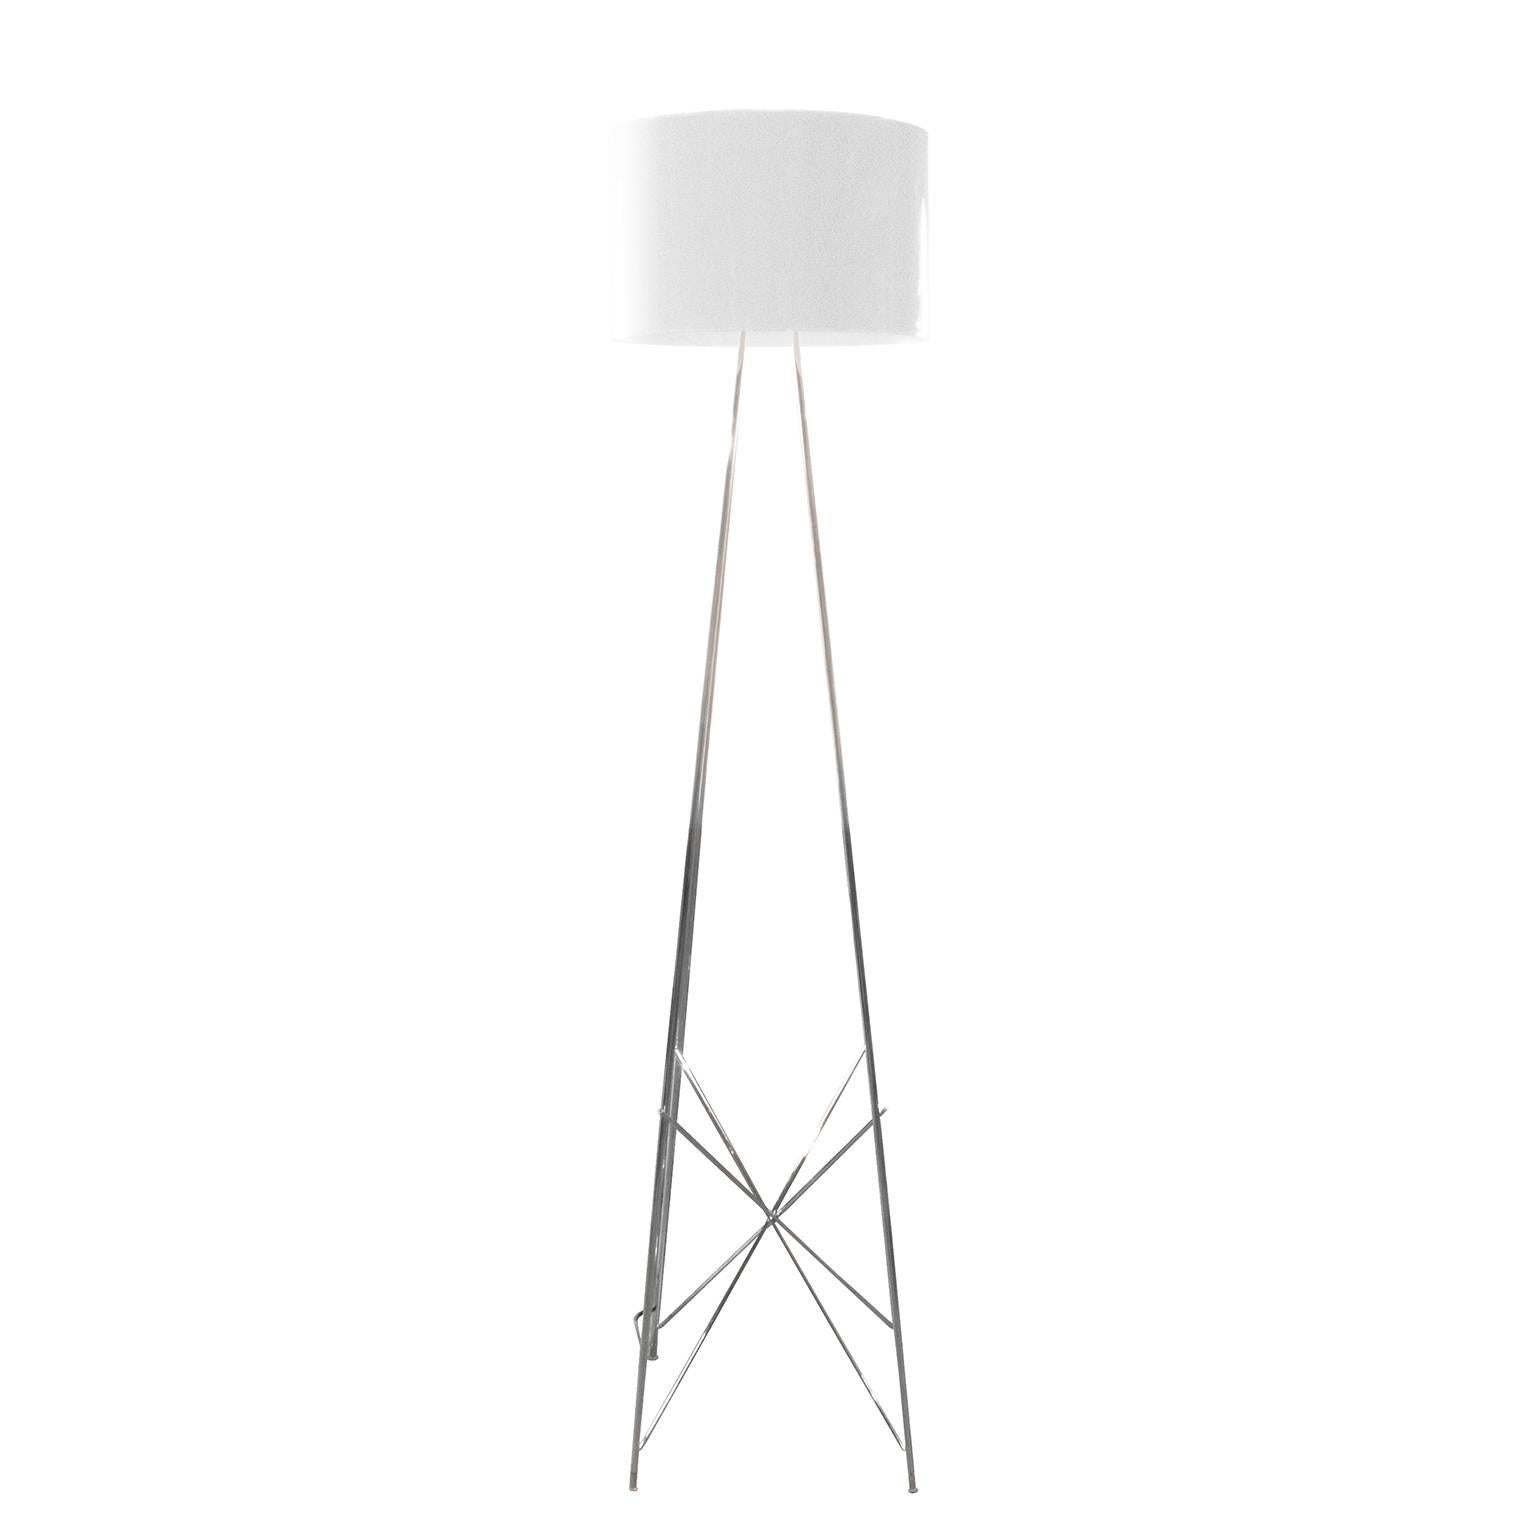 Designed by Rodolfo Dordoni in 2006, the Ray F floor lamp updates a Classic shape to give it a decidedly contemporary edge.